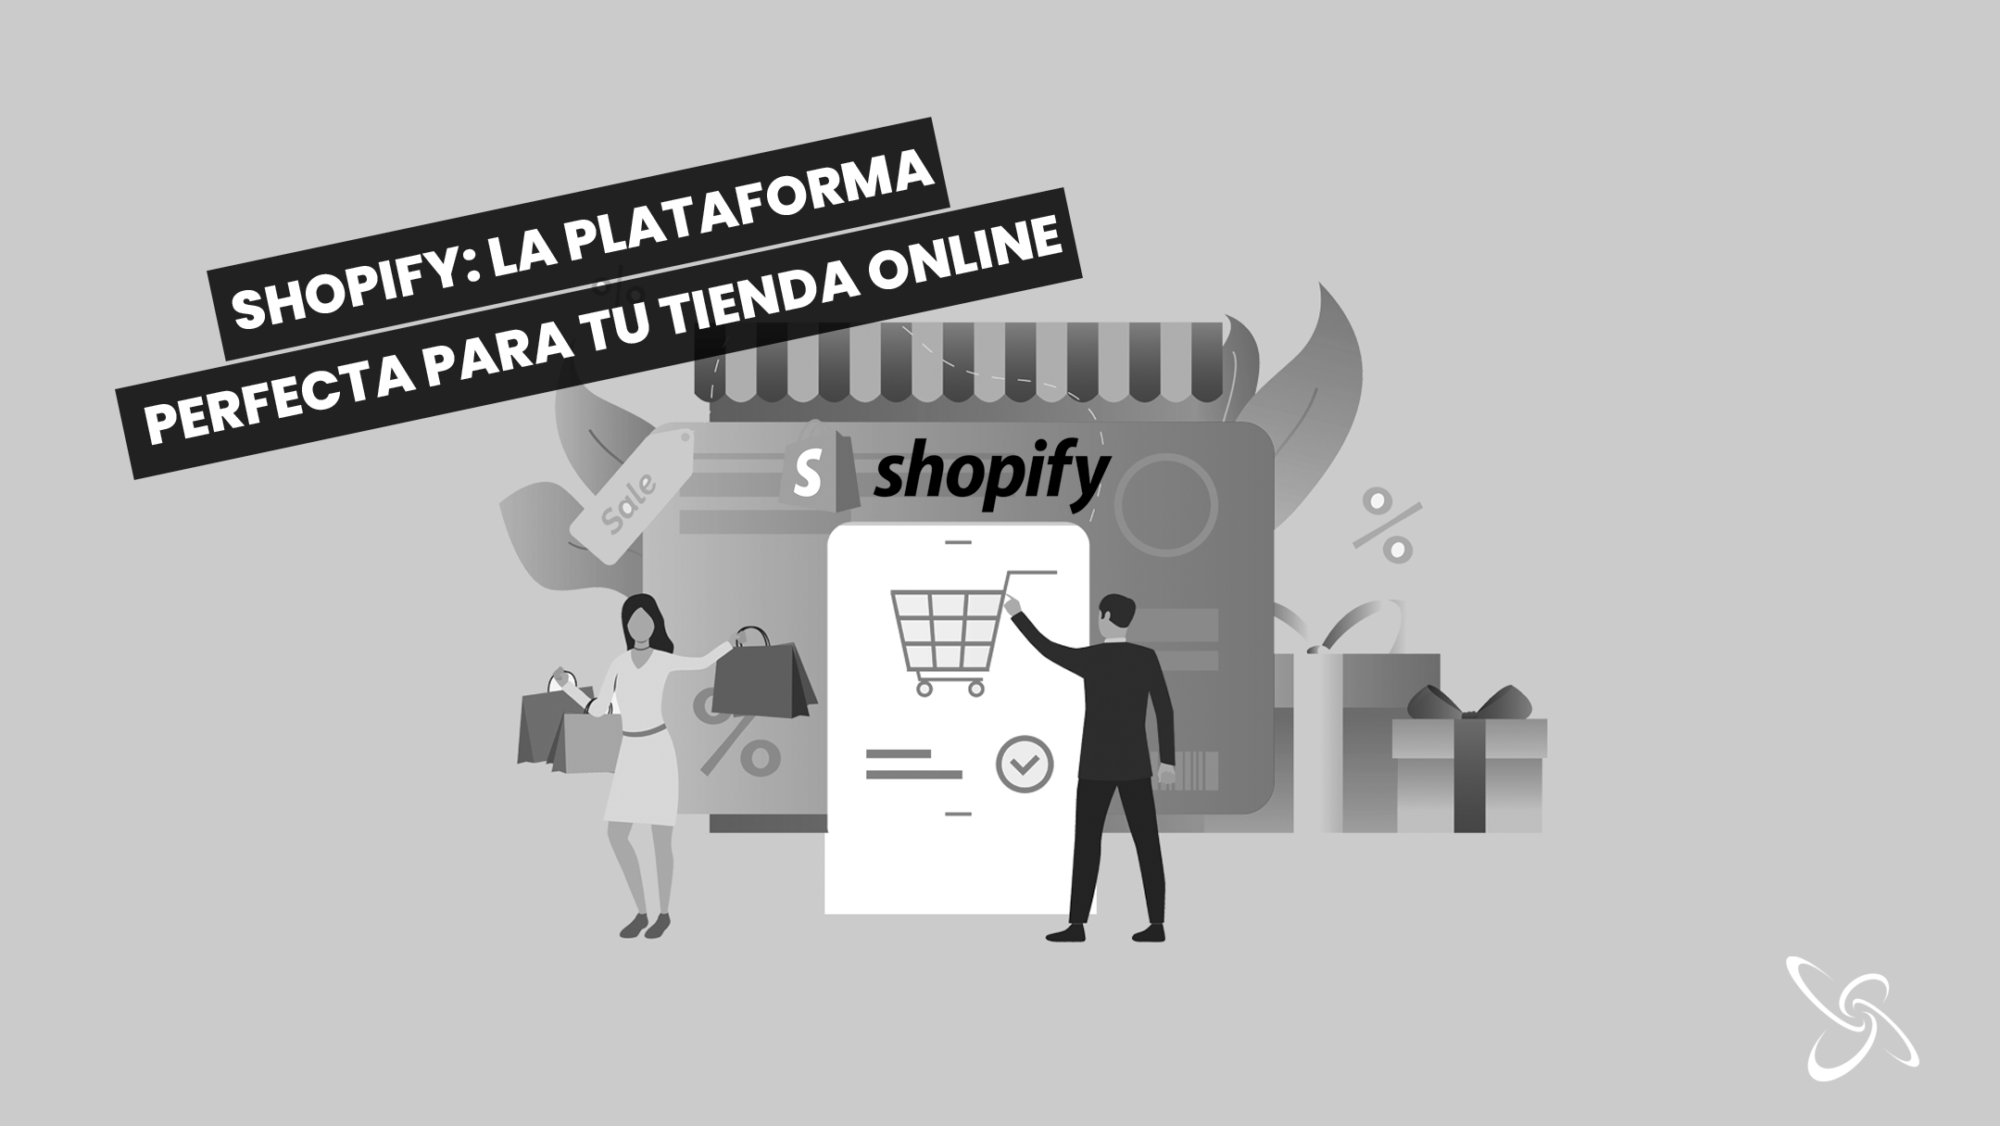 Shopify: the perfect platform for your online store